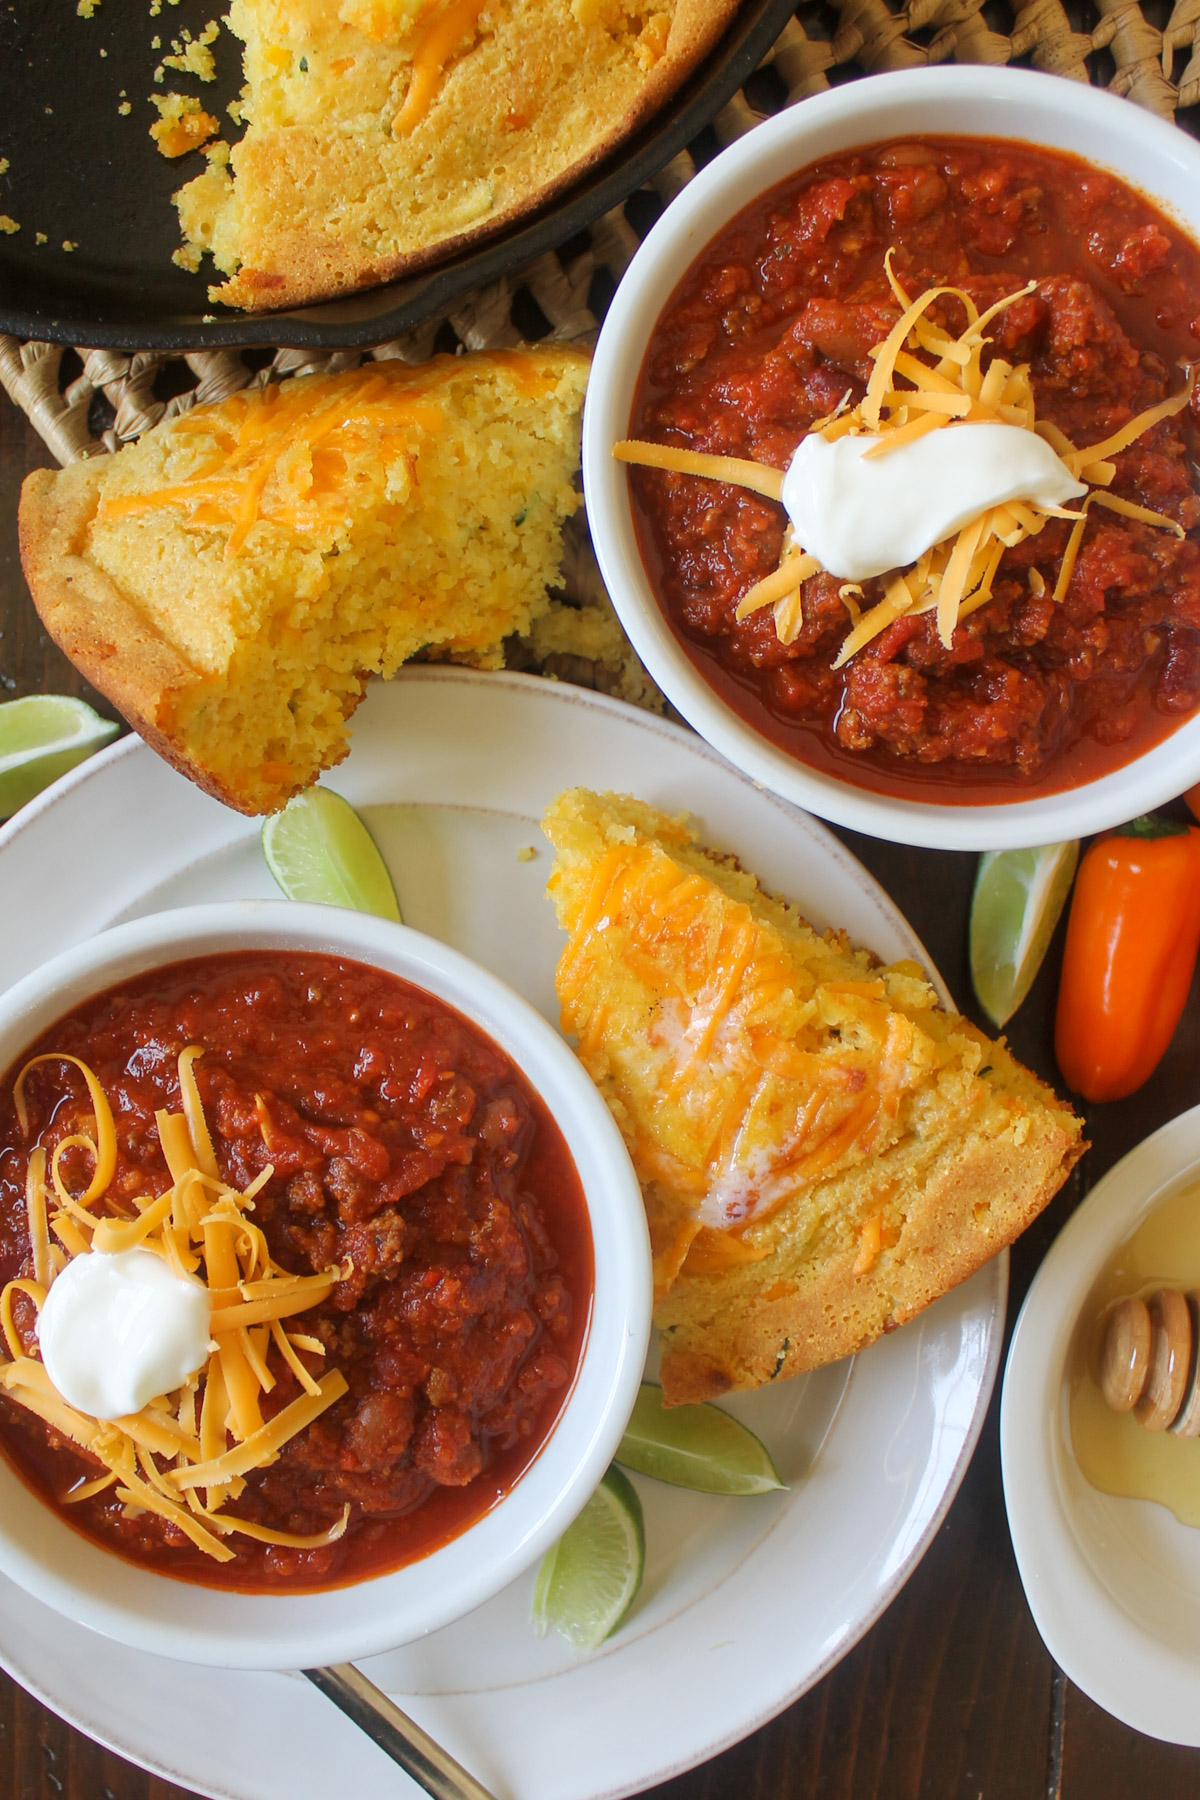 Bowls of chili on plates with wedges of cornbread.